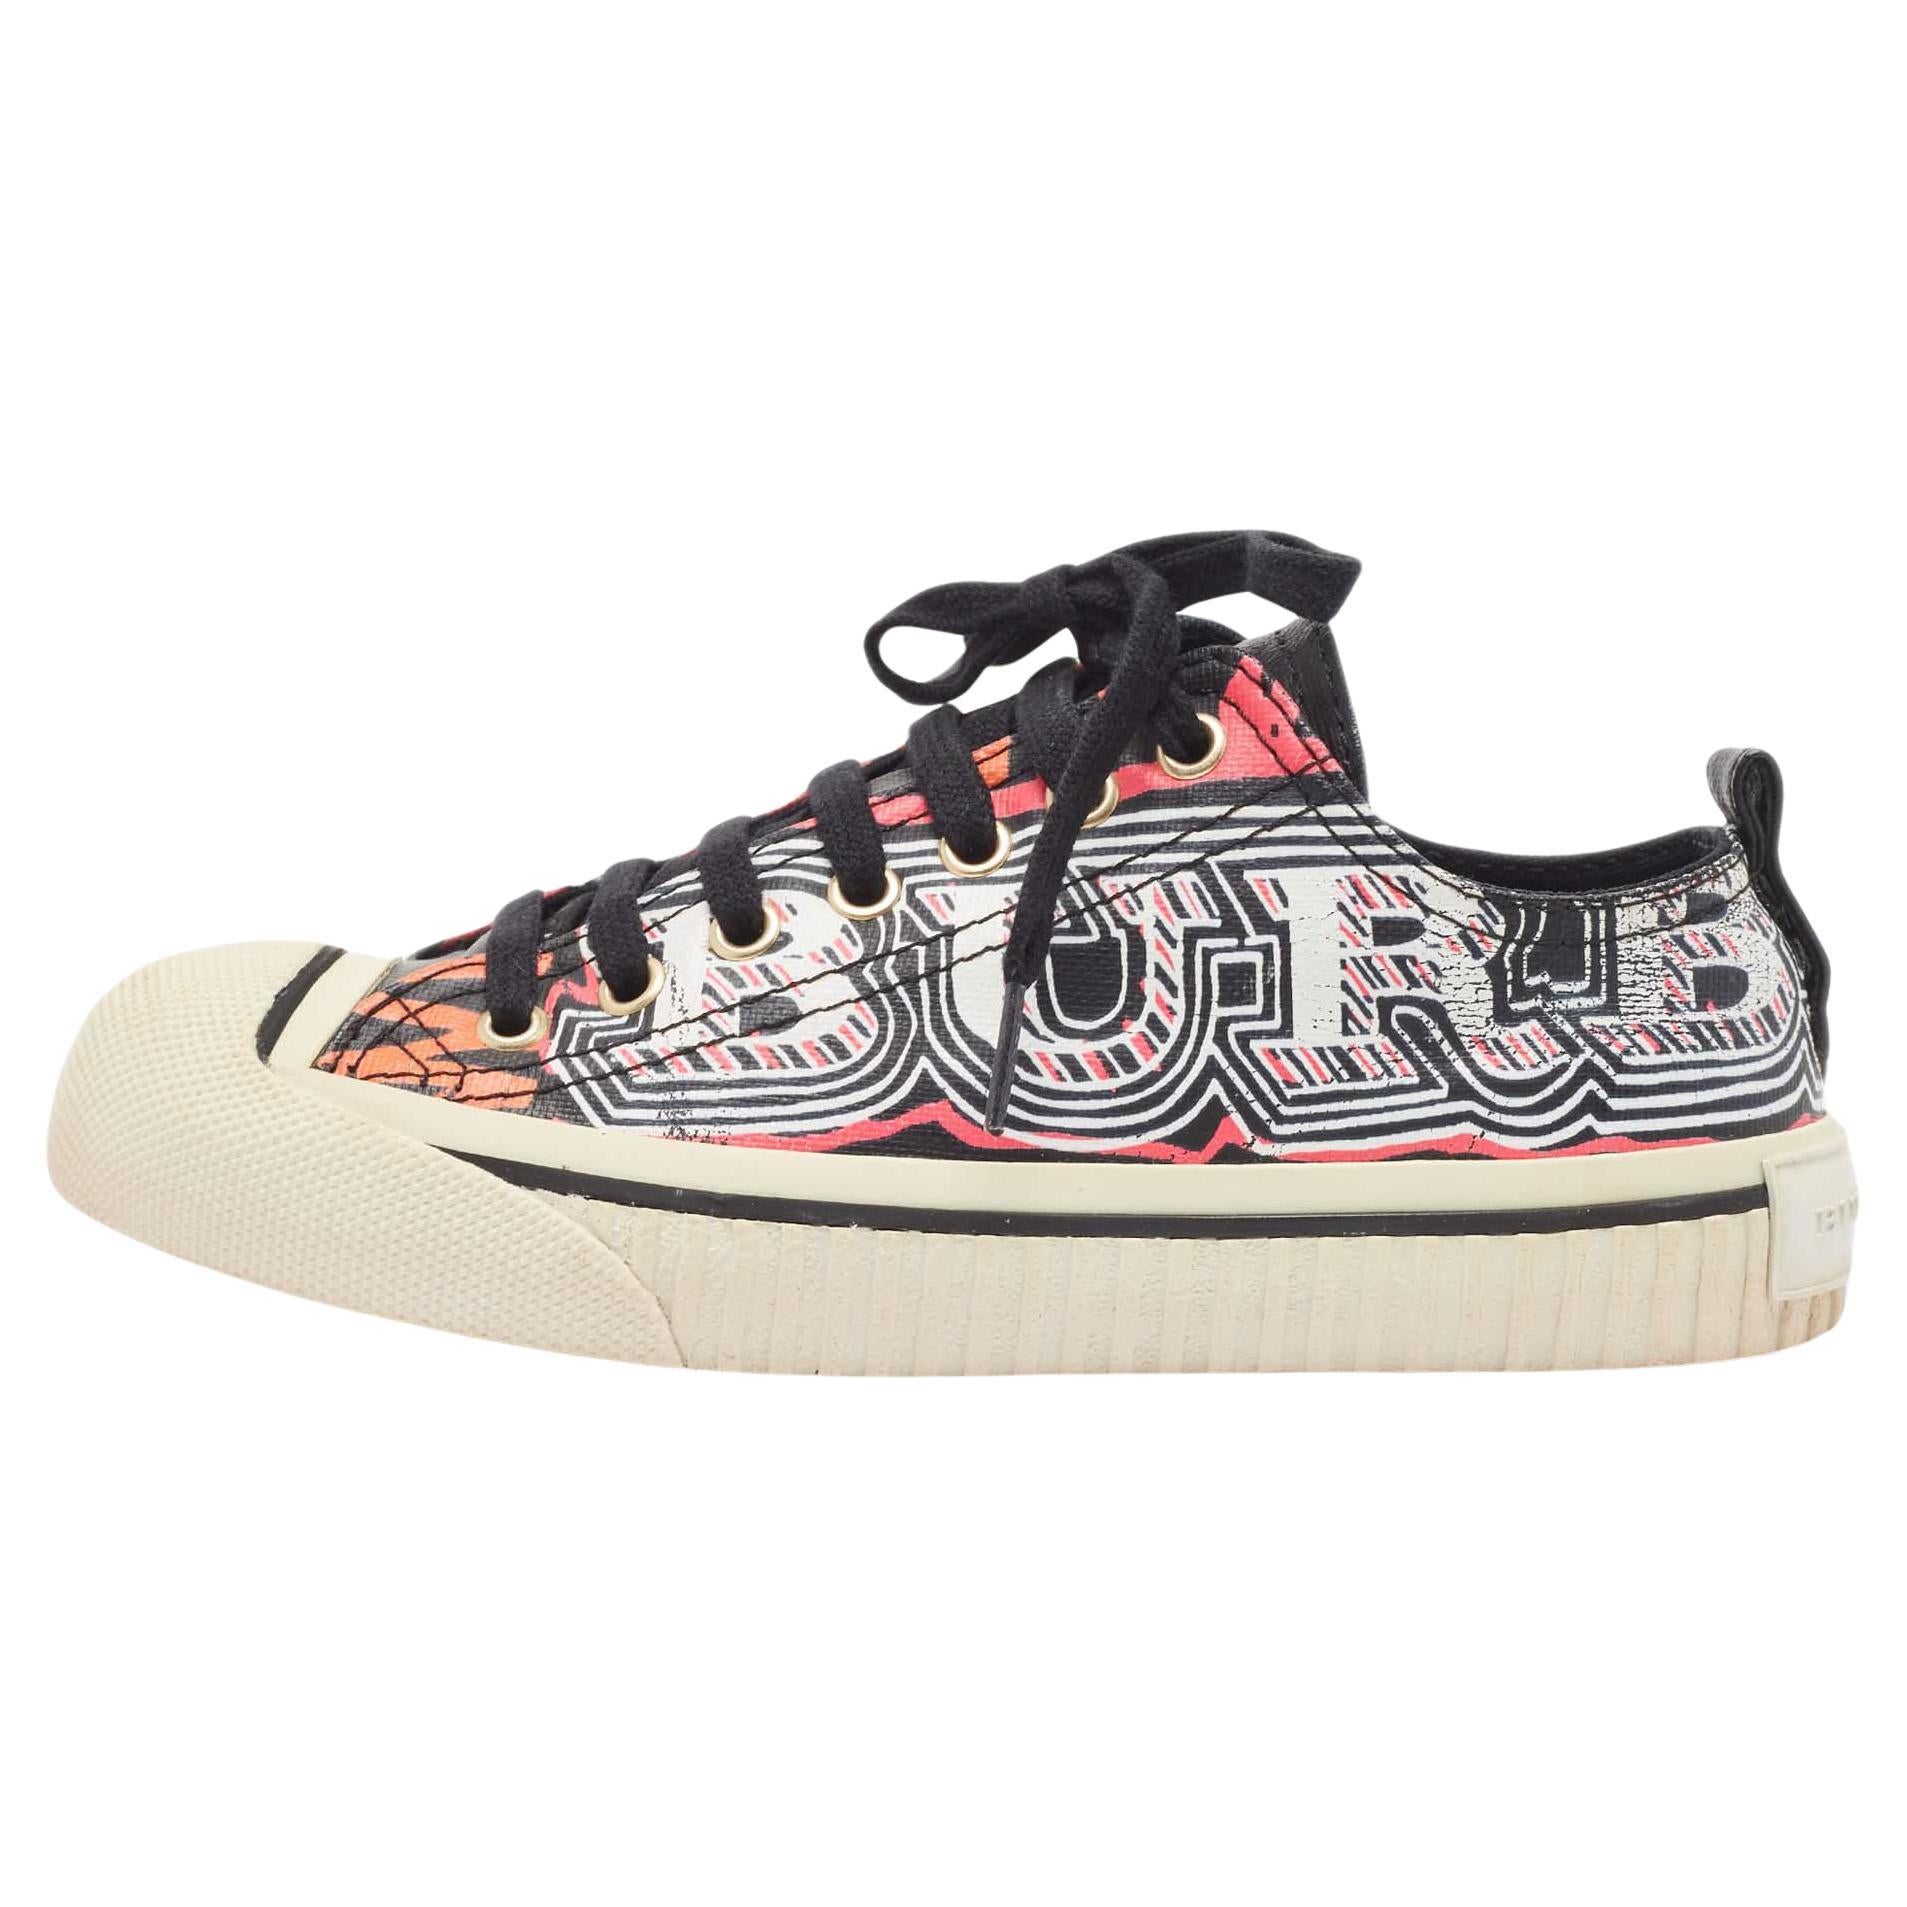 Burberry Multicolor Coated Canvas Kingly Mark Print Low Top Sneakers Size 35 For Sale